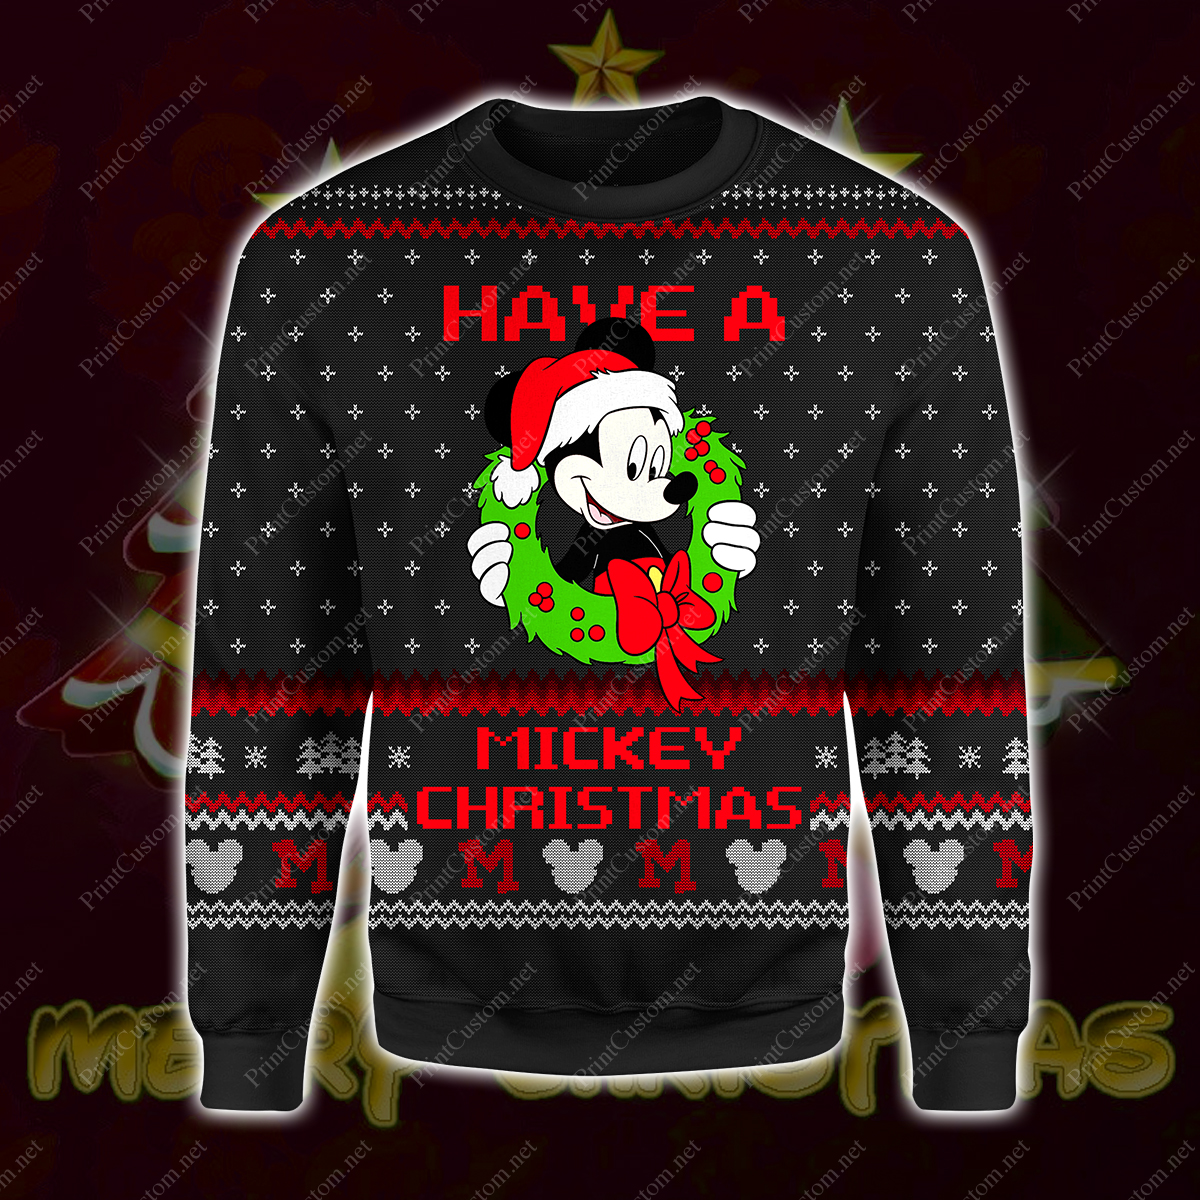 Have a mickey christmas full printing ugly christmas sweater 4